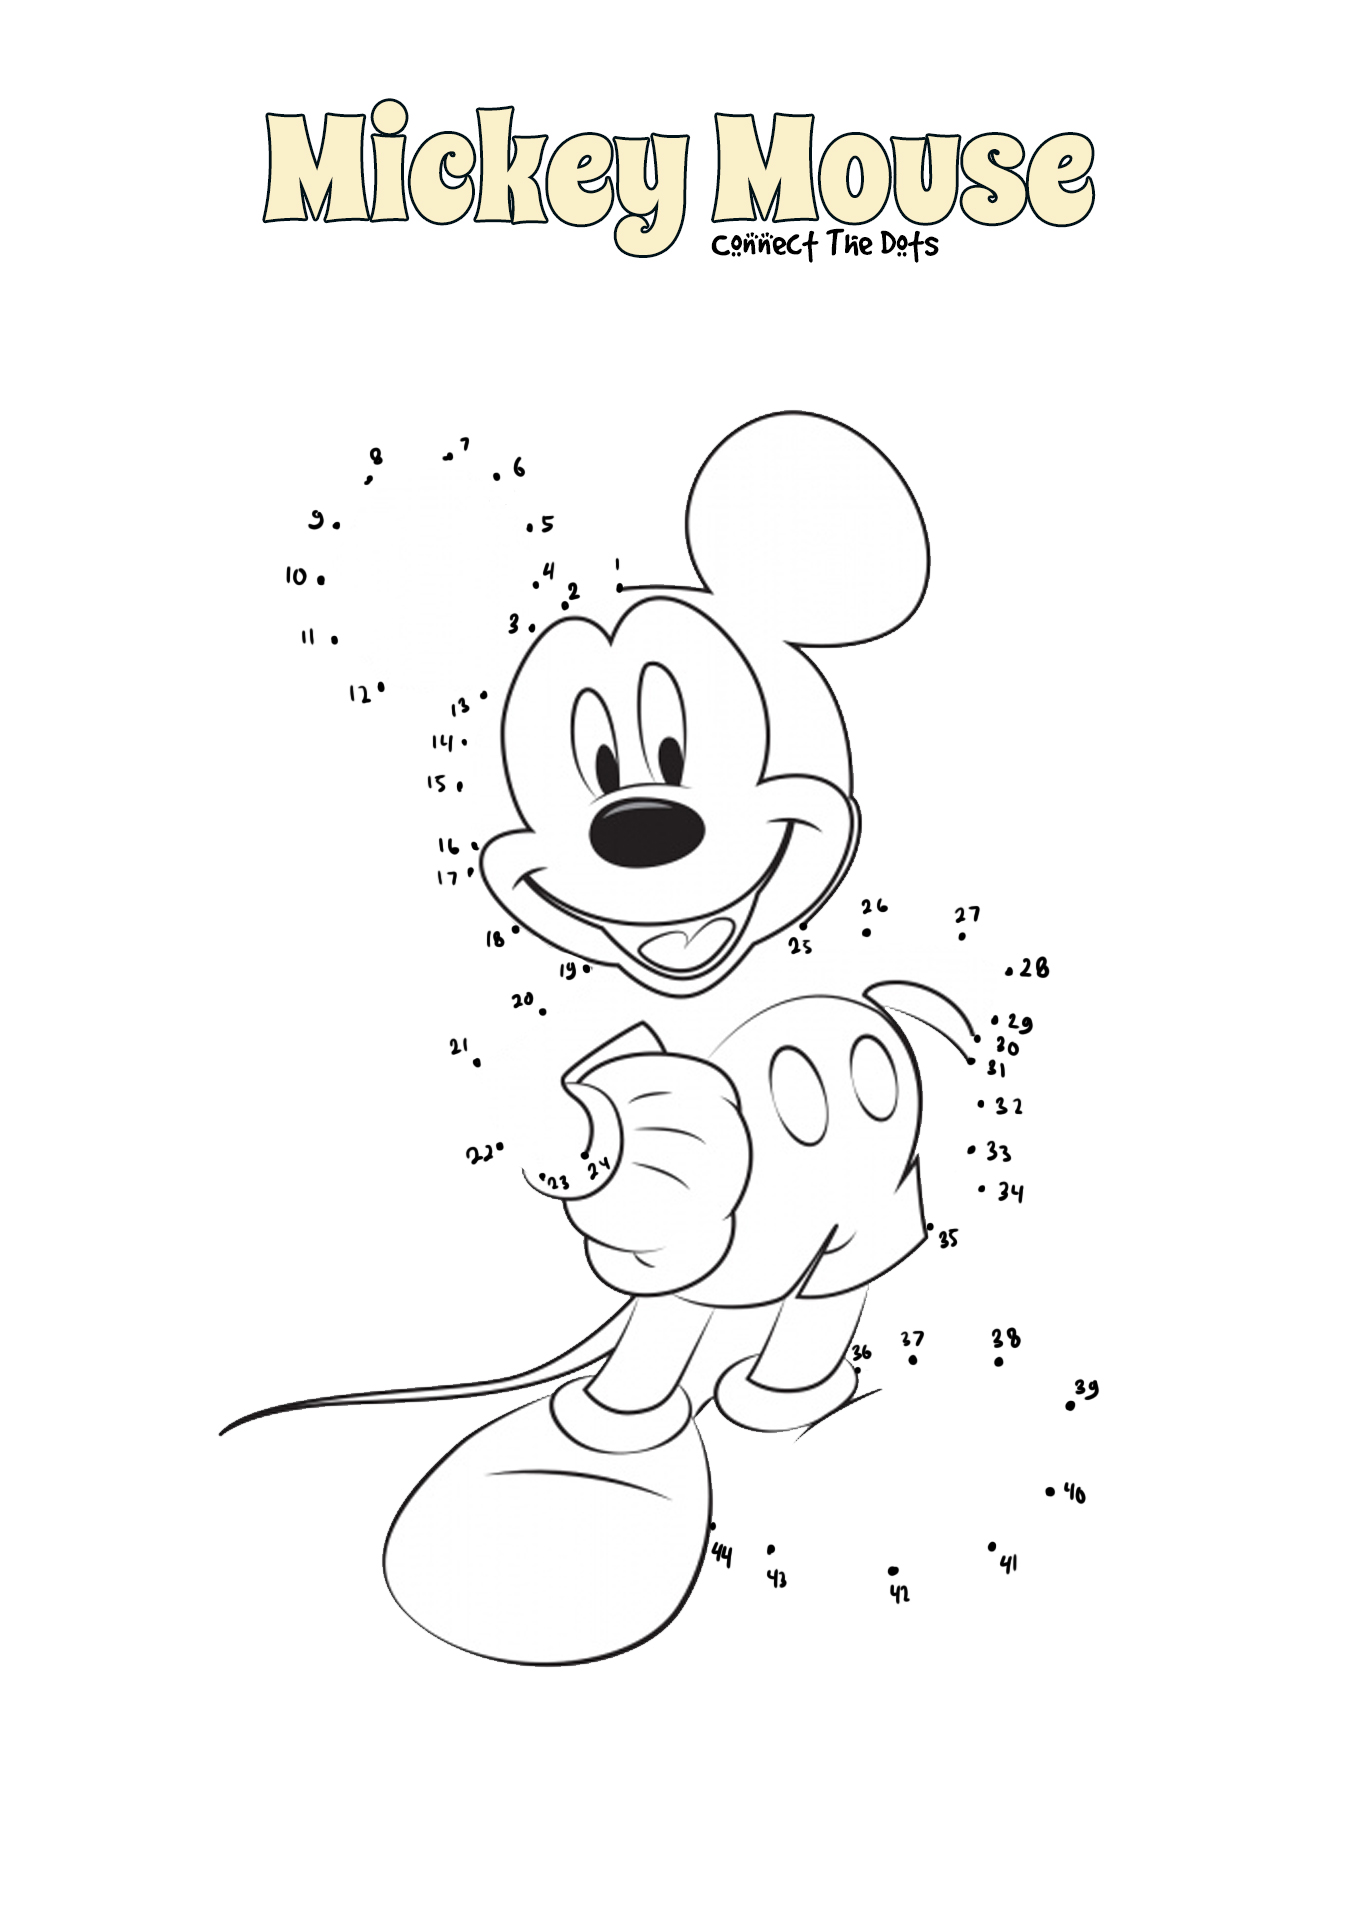 Mickey Mouse Printable Connect the Dots Image